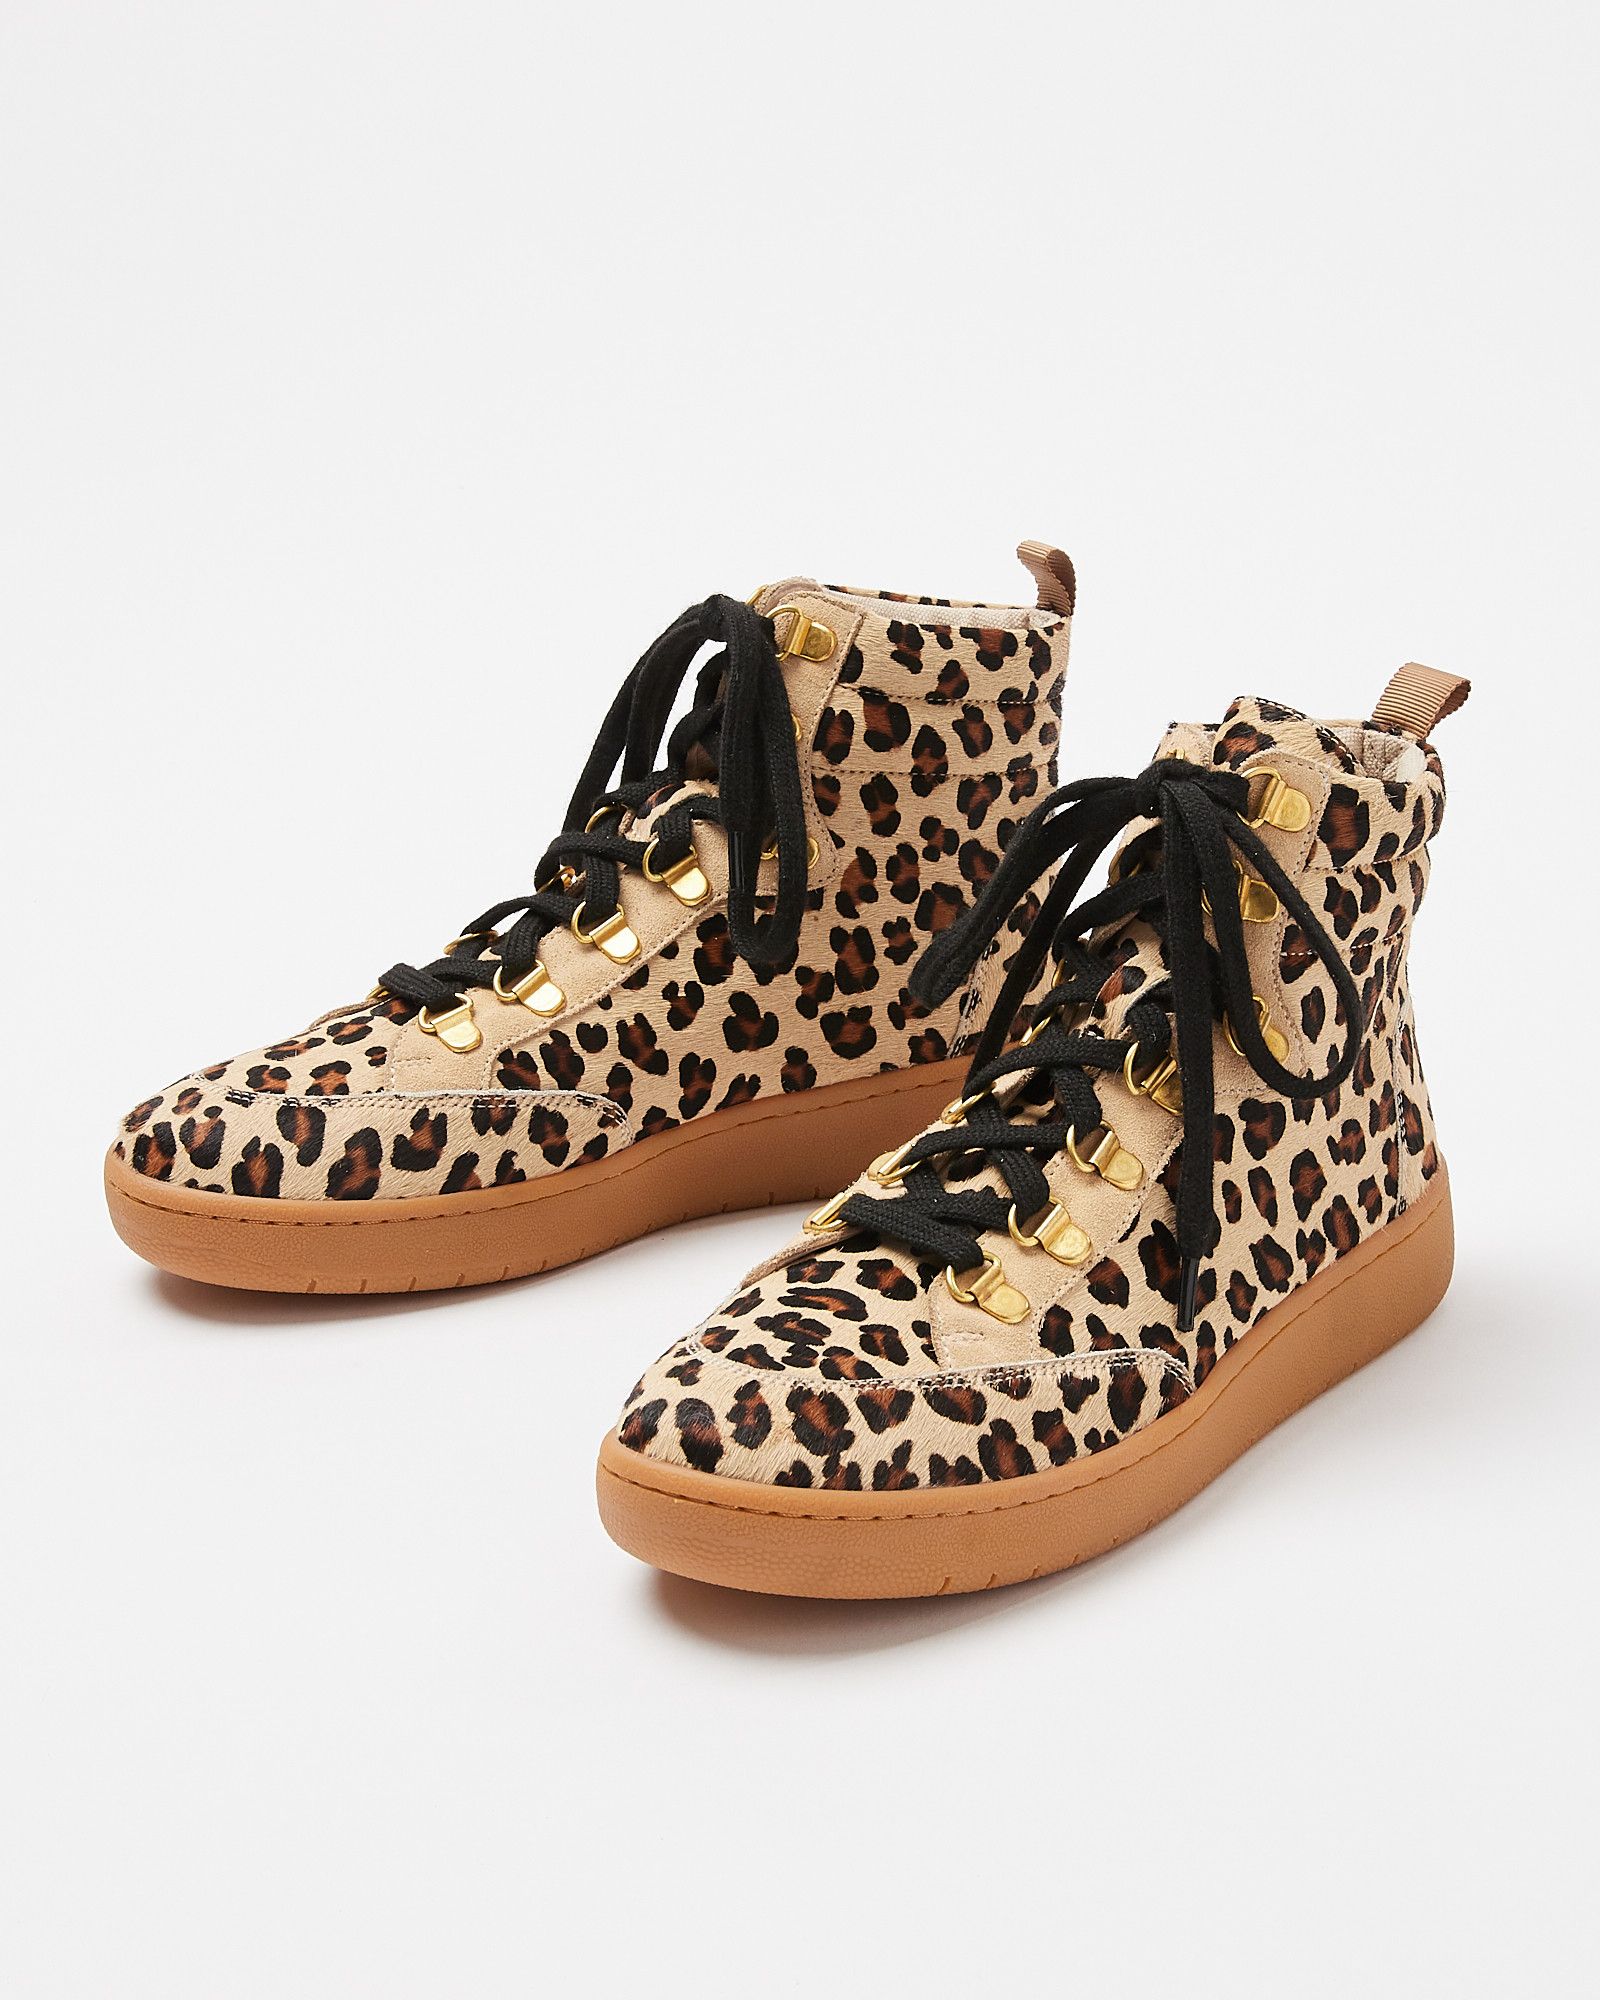 Hike Leopard Print Lace Up Ankle Boots 